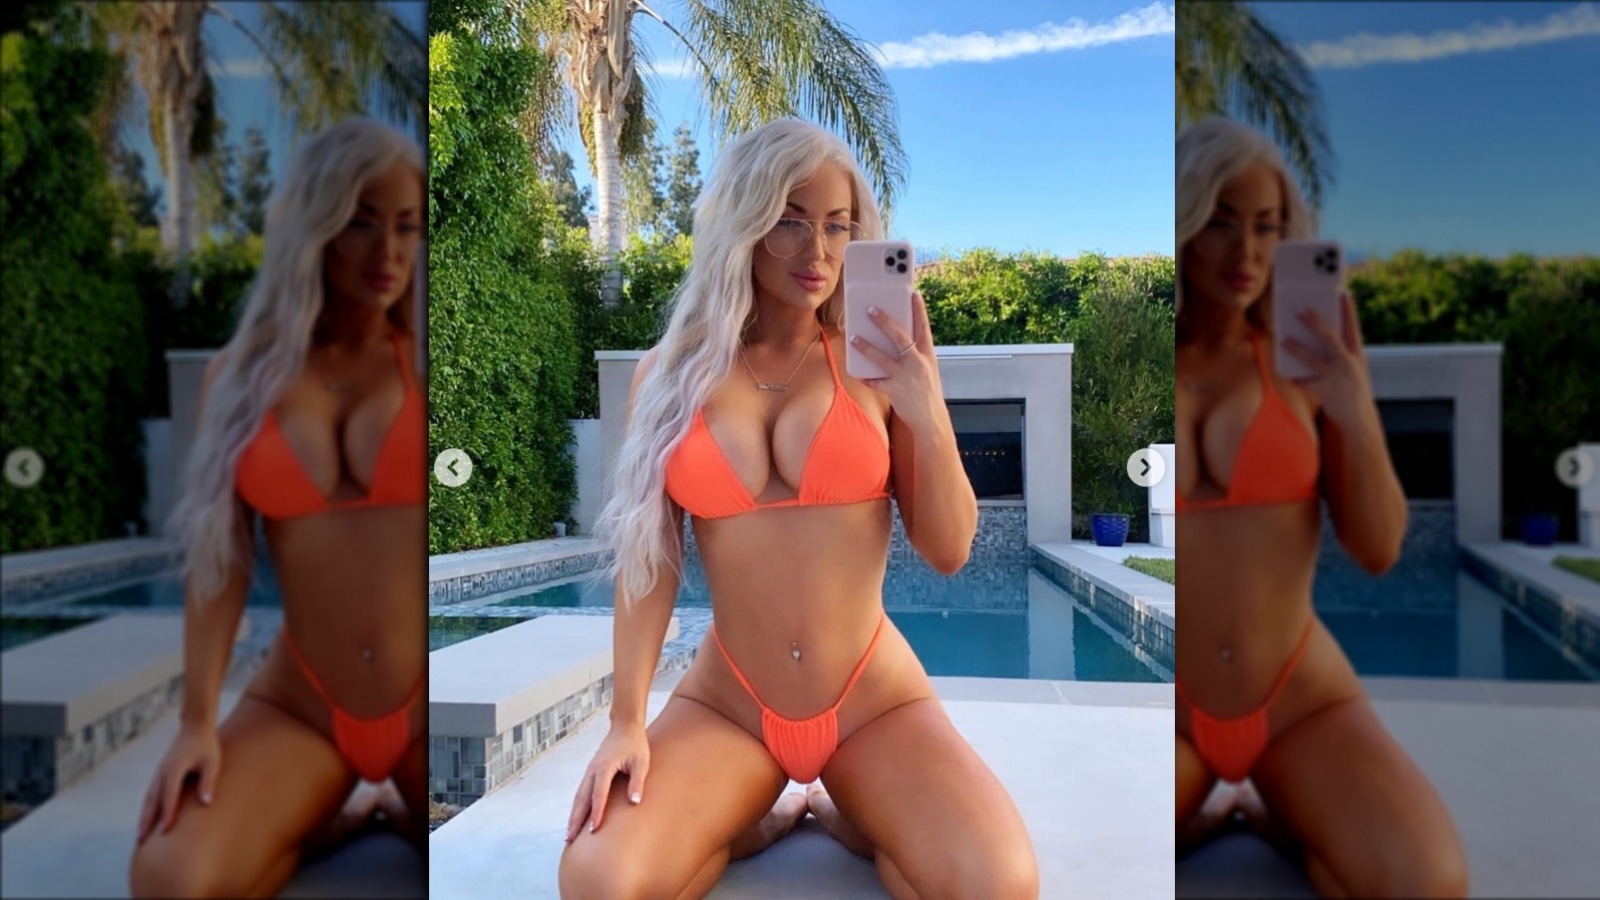 Laci kay somers playboy pictures